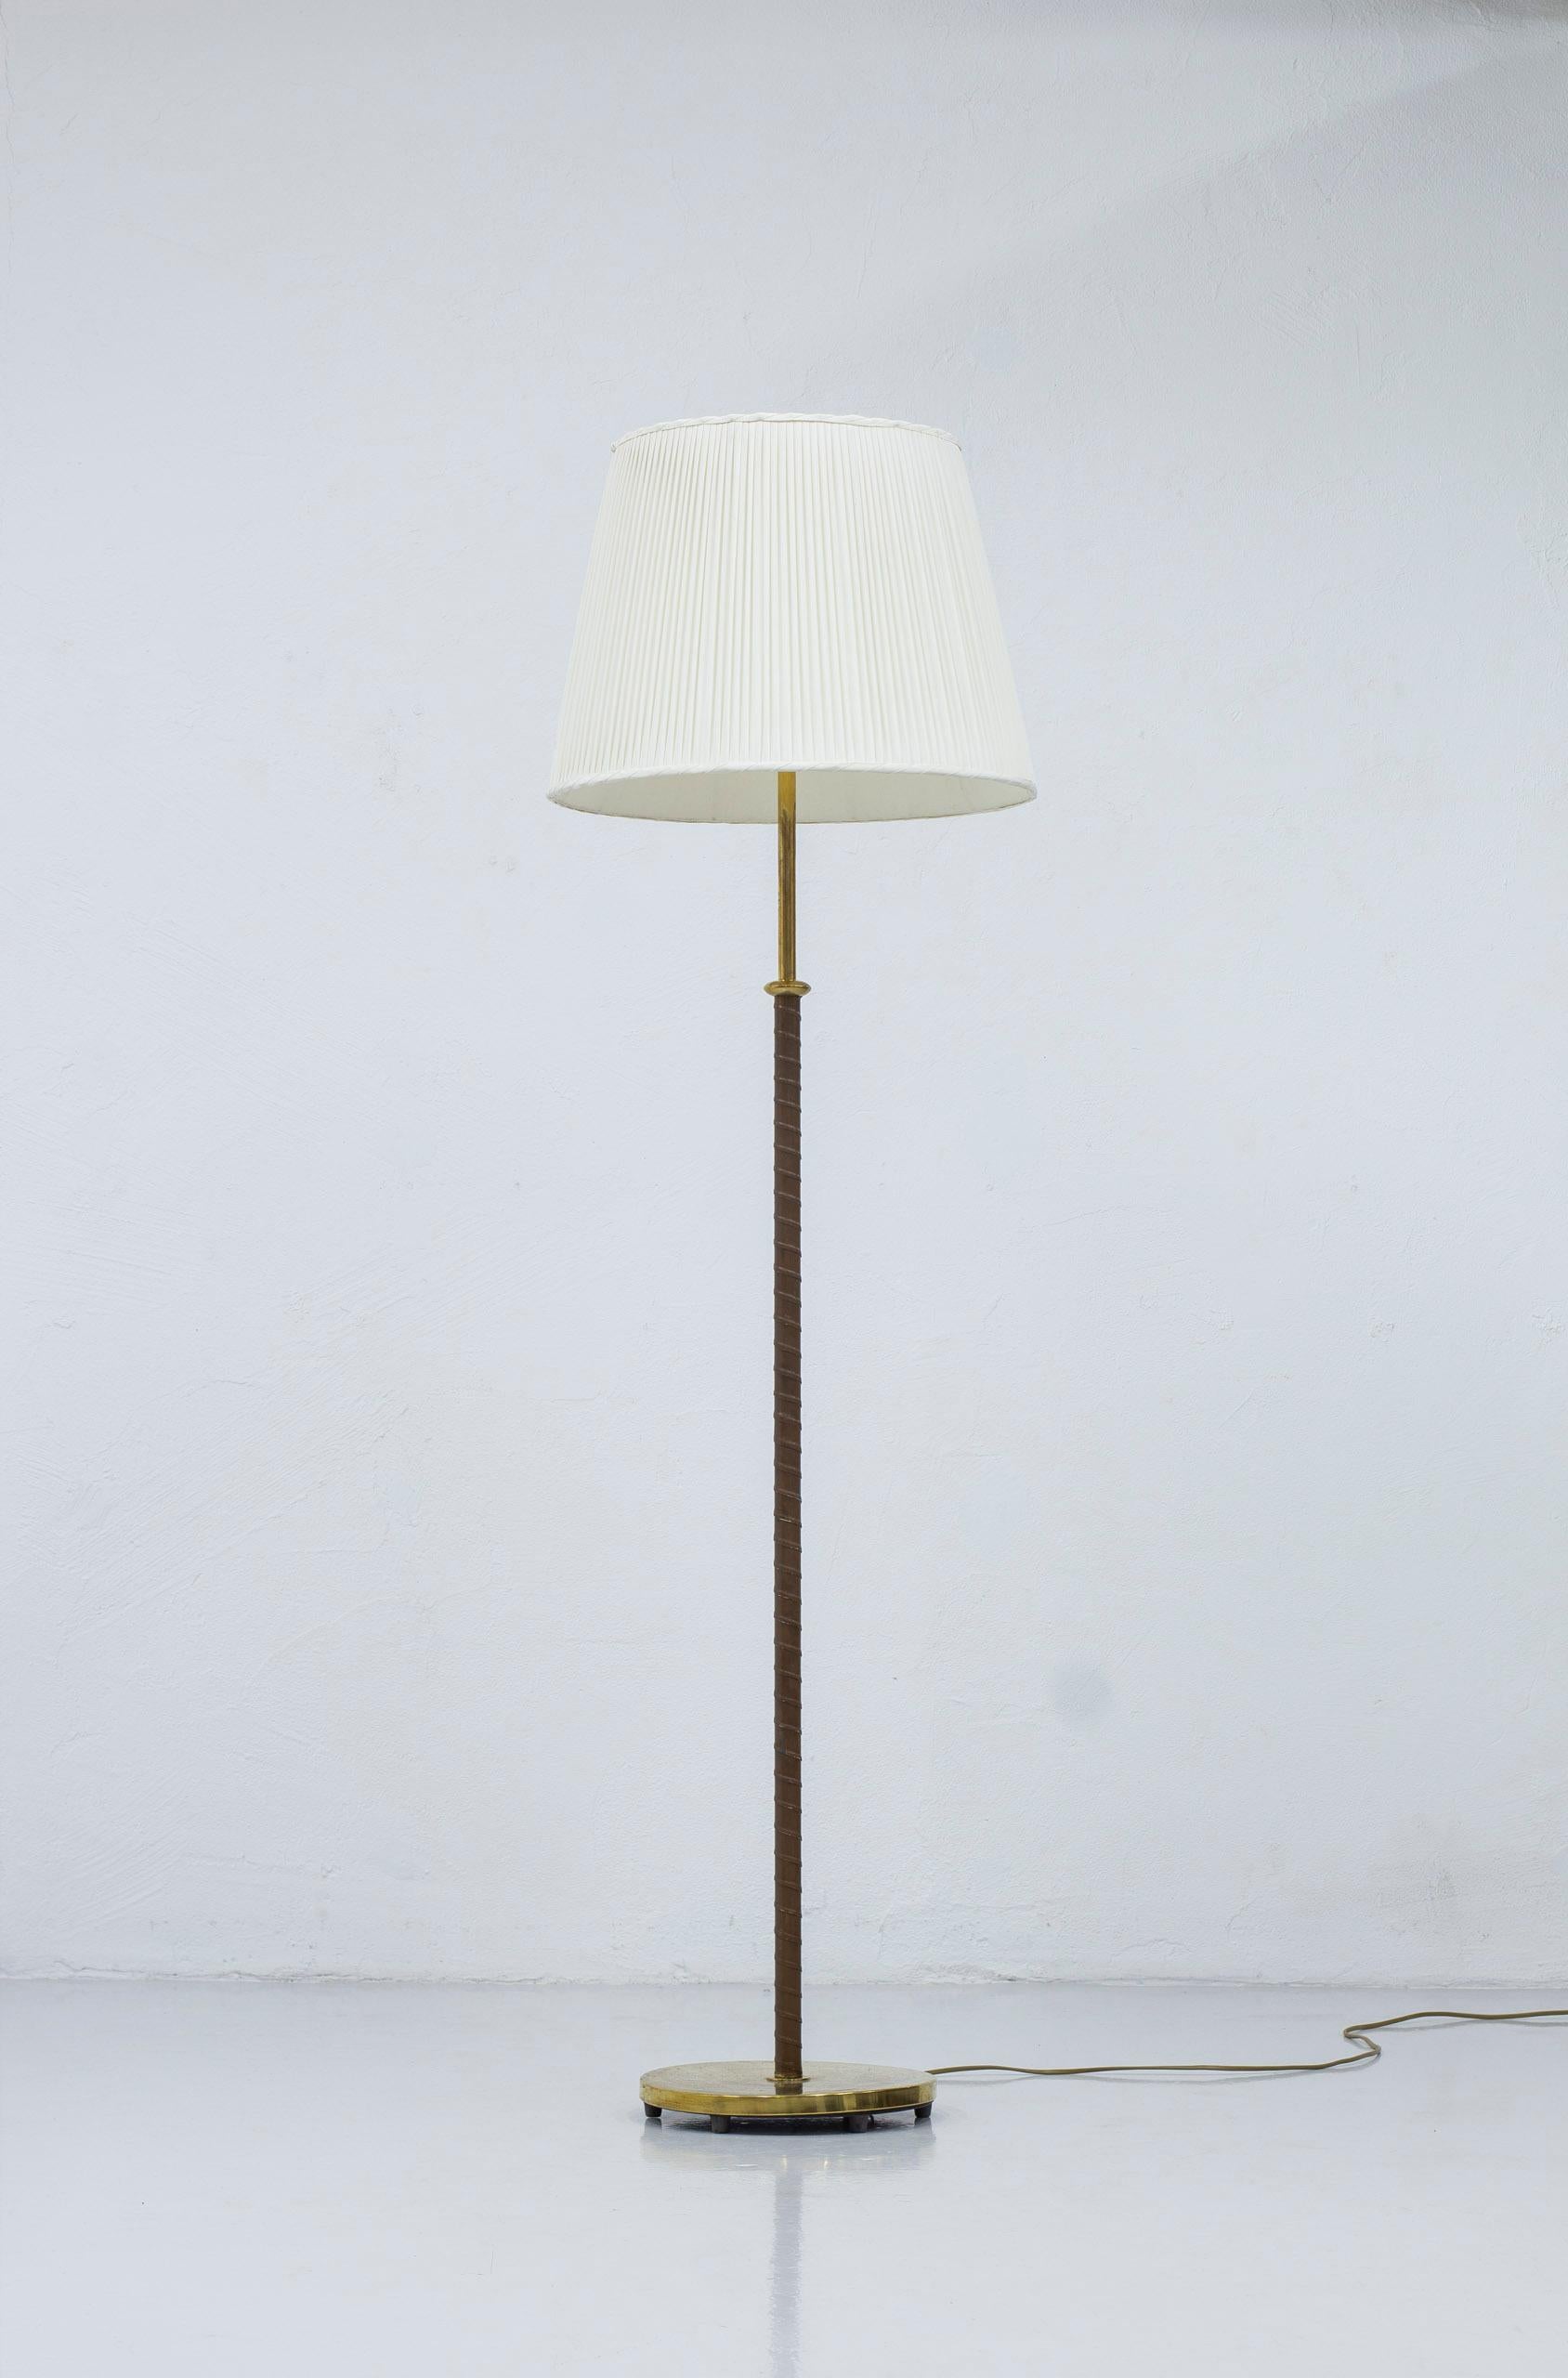 Floor lamp model 15600 designed by Harald Notini. Produced by Arvid Böhlmarks lampfabrik. Made during the 1950s. Brass and wrapped stem with original leather. Large hand pleated silk shade. Original bakelite turn switch on the lamp holder in working